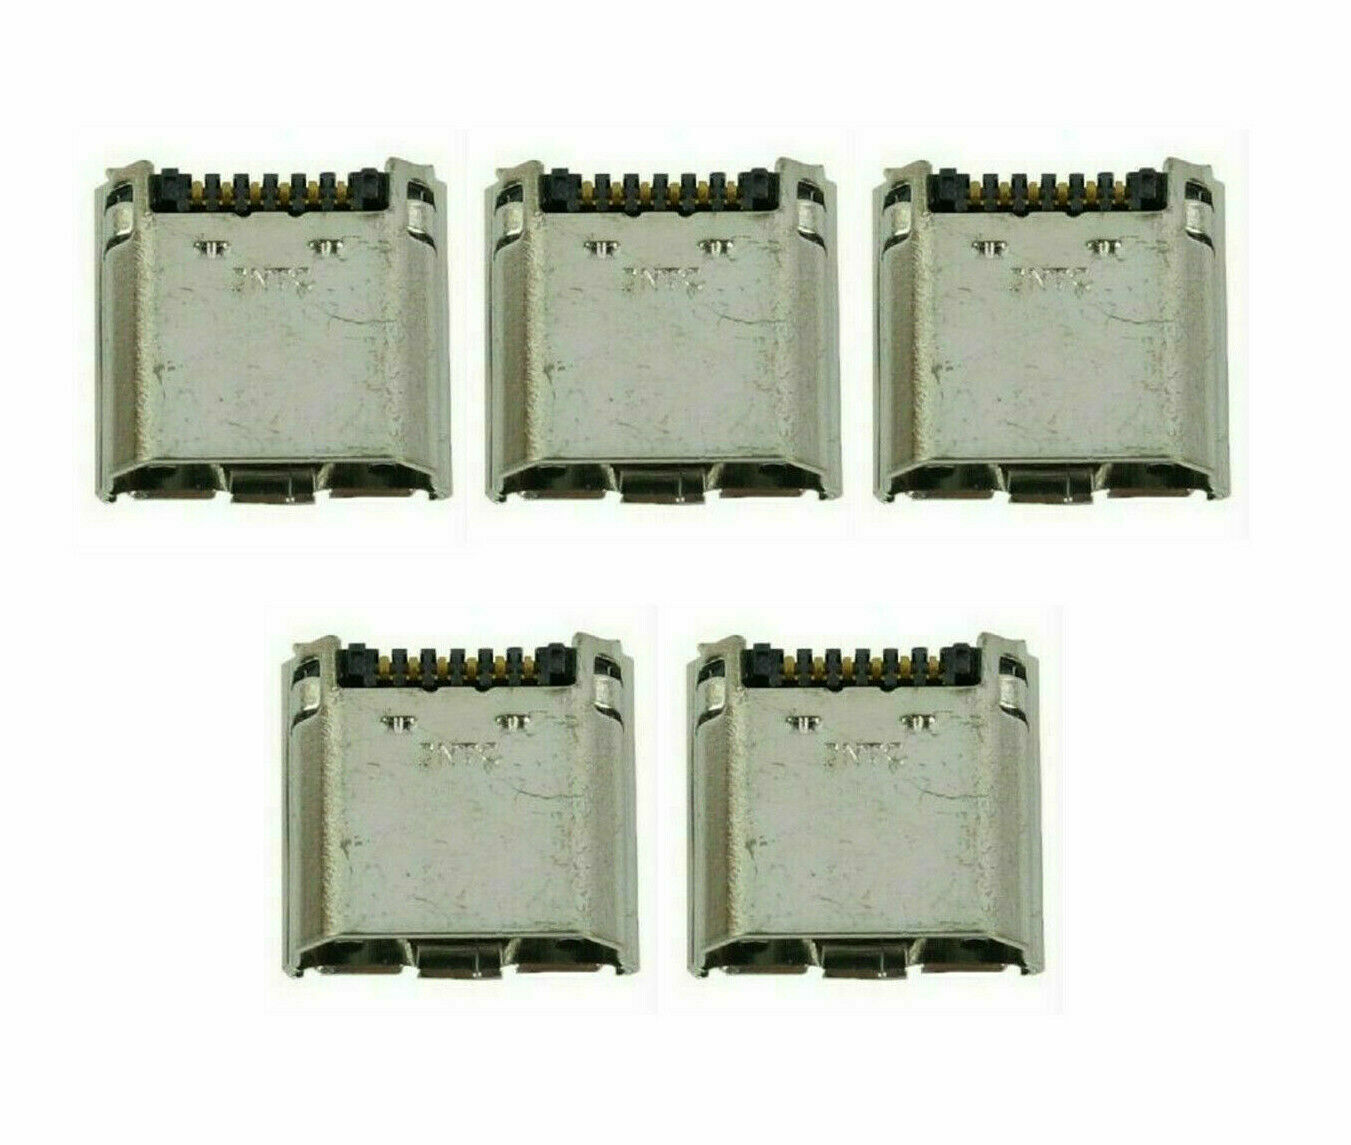 5x Micro USB Charging Port For Samsung Galaxy Tab 4 7.0 SM-T230N SM-T230NU Unbranded Does not apply